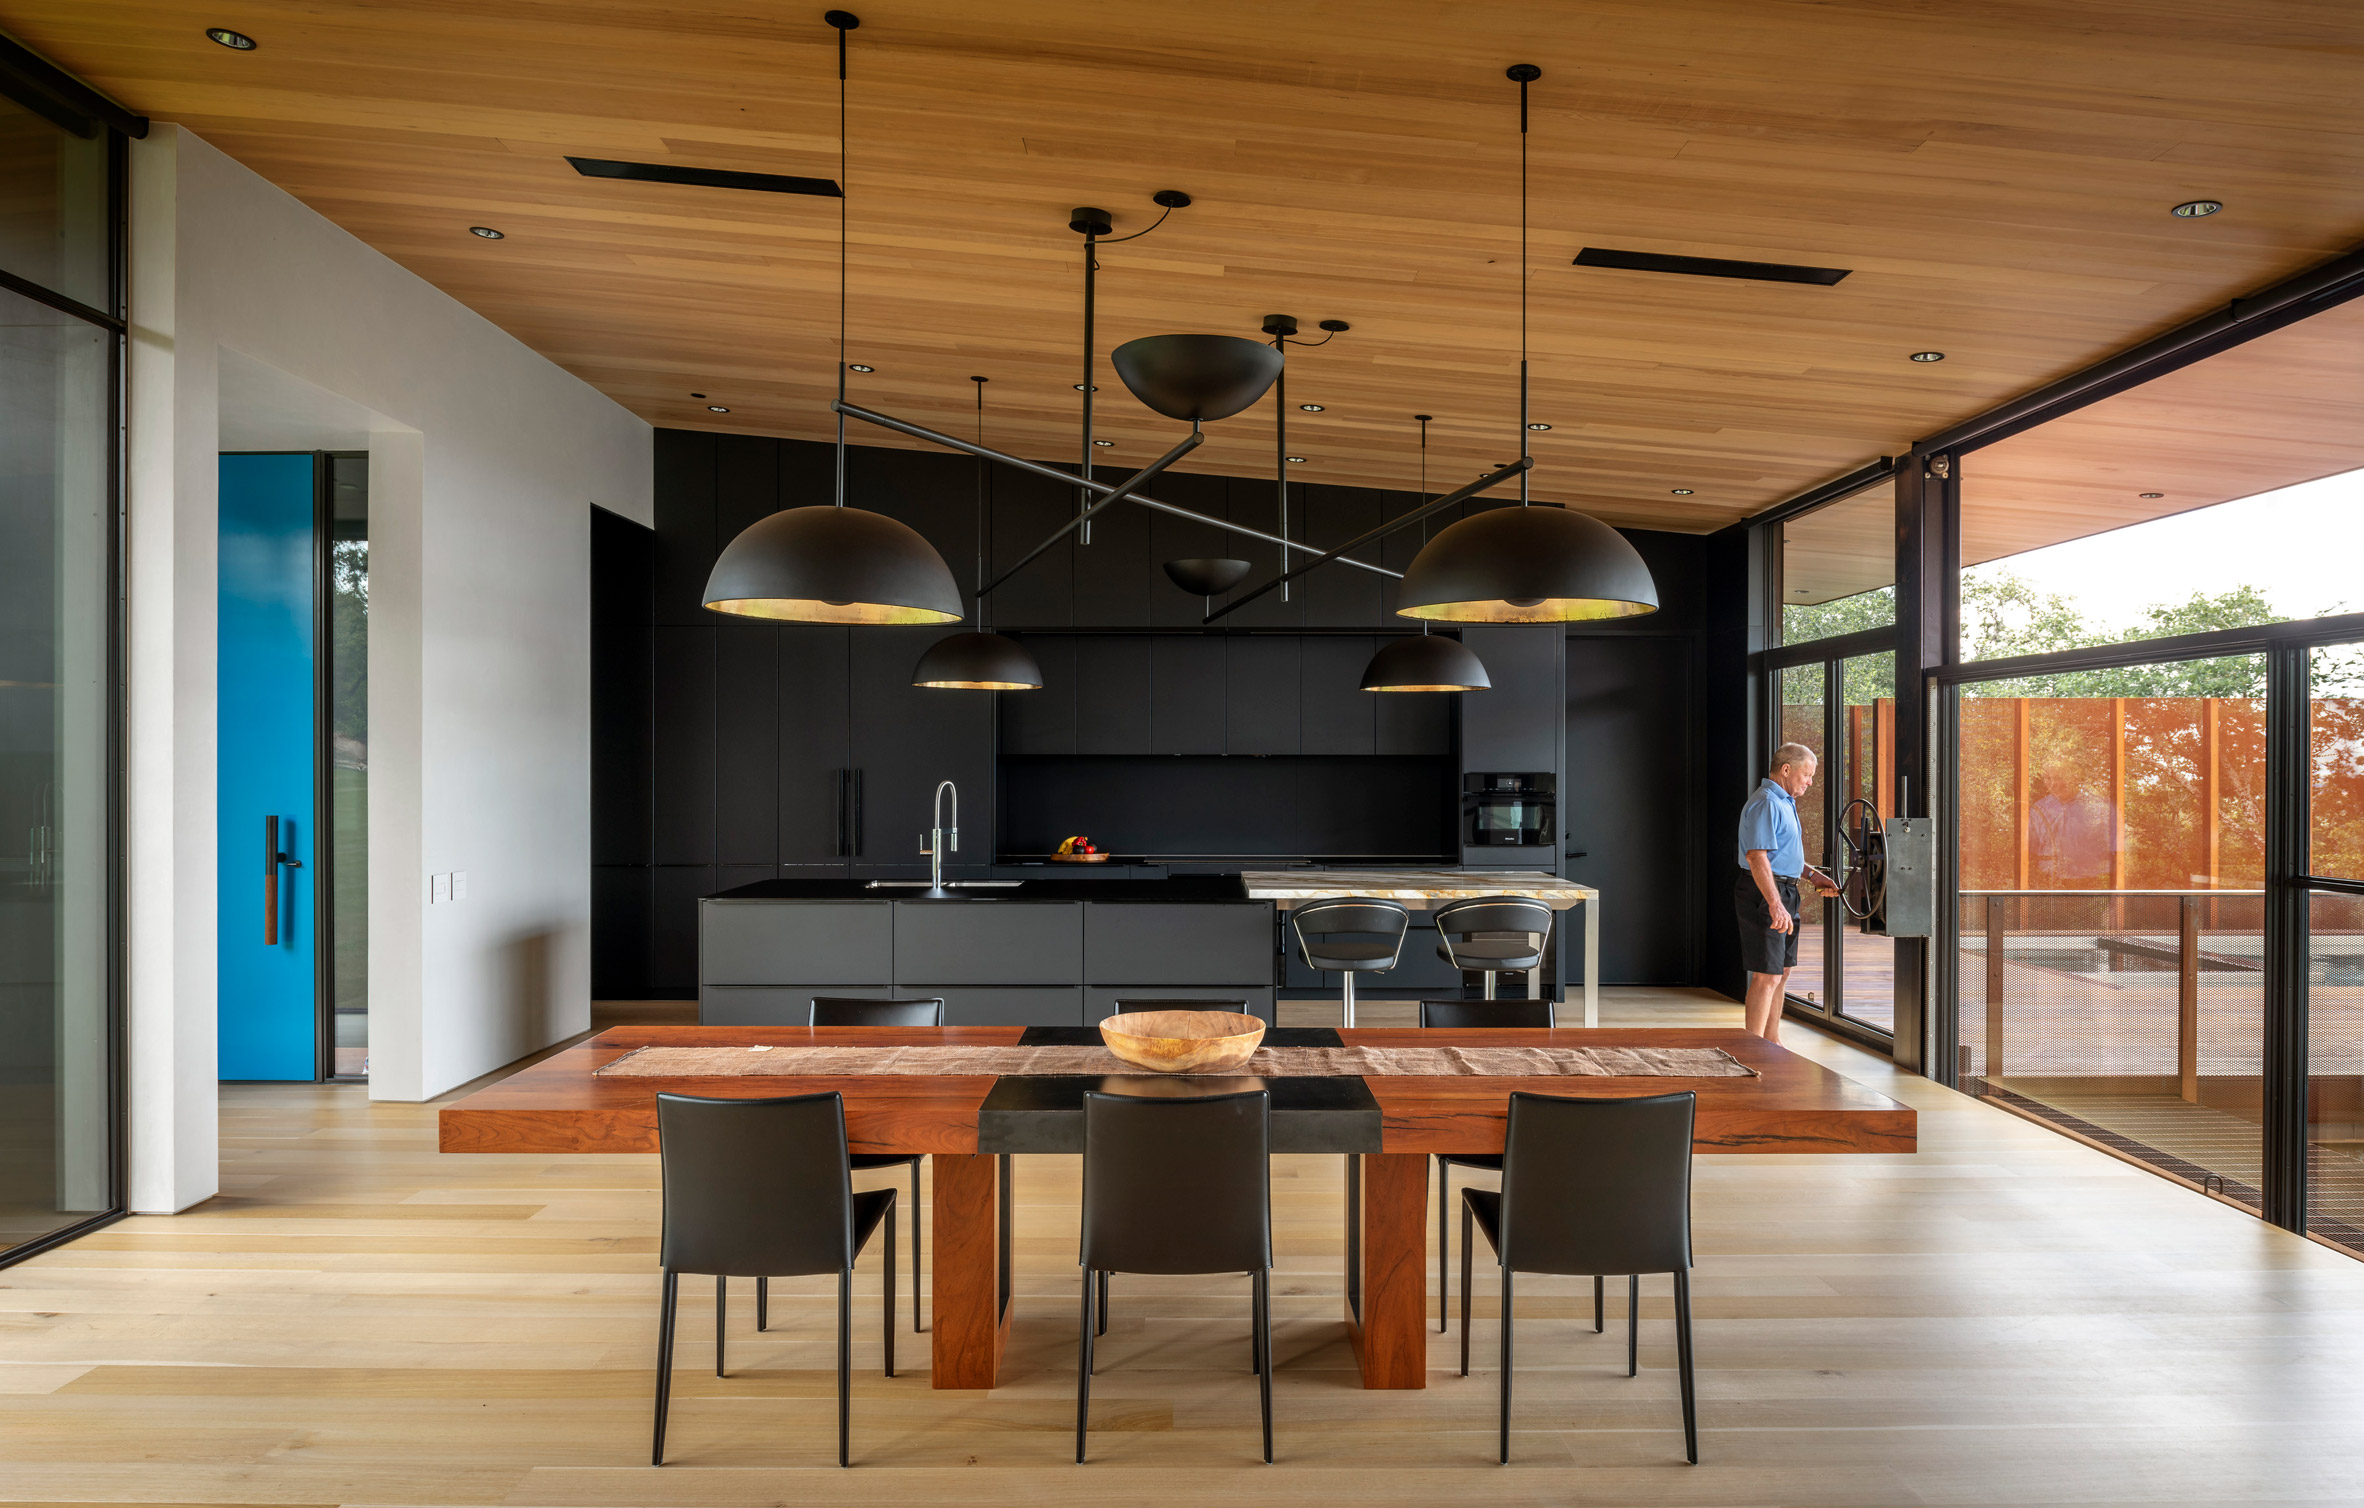 Interior kitchen and living space of house by Olson Kundig